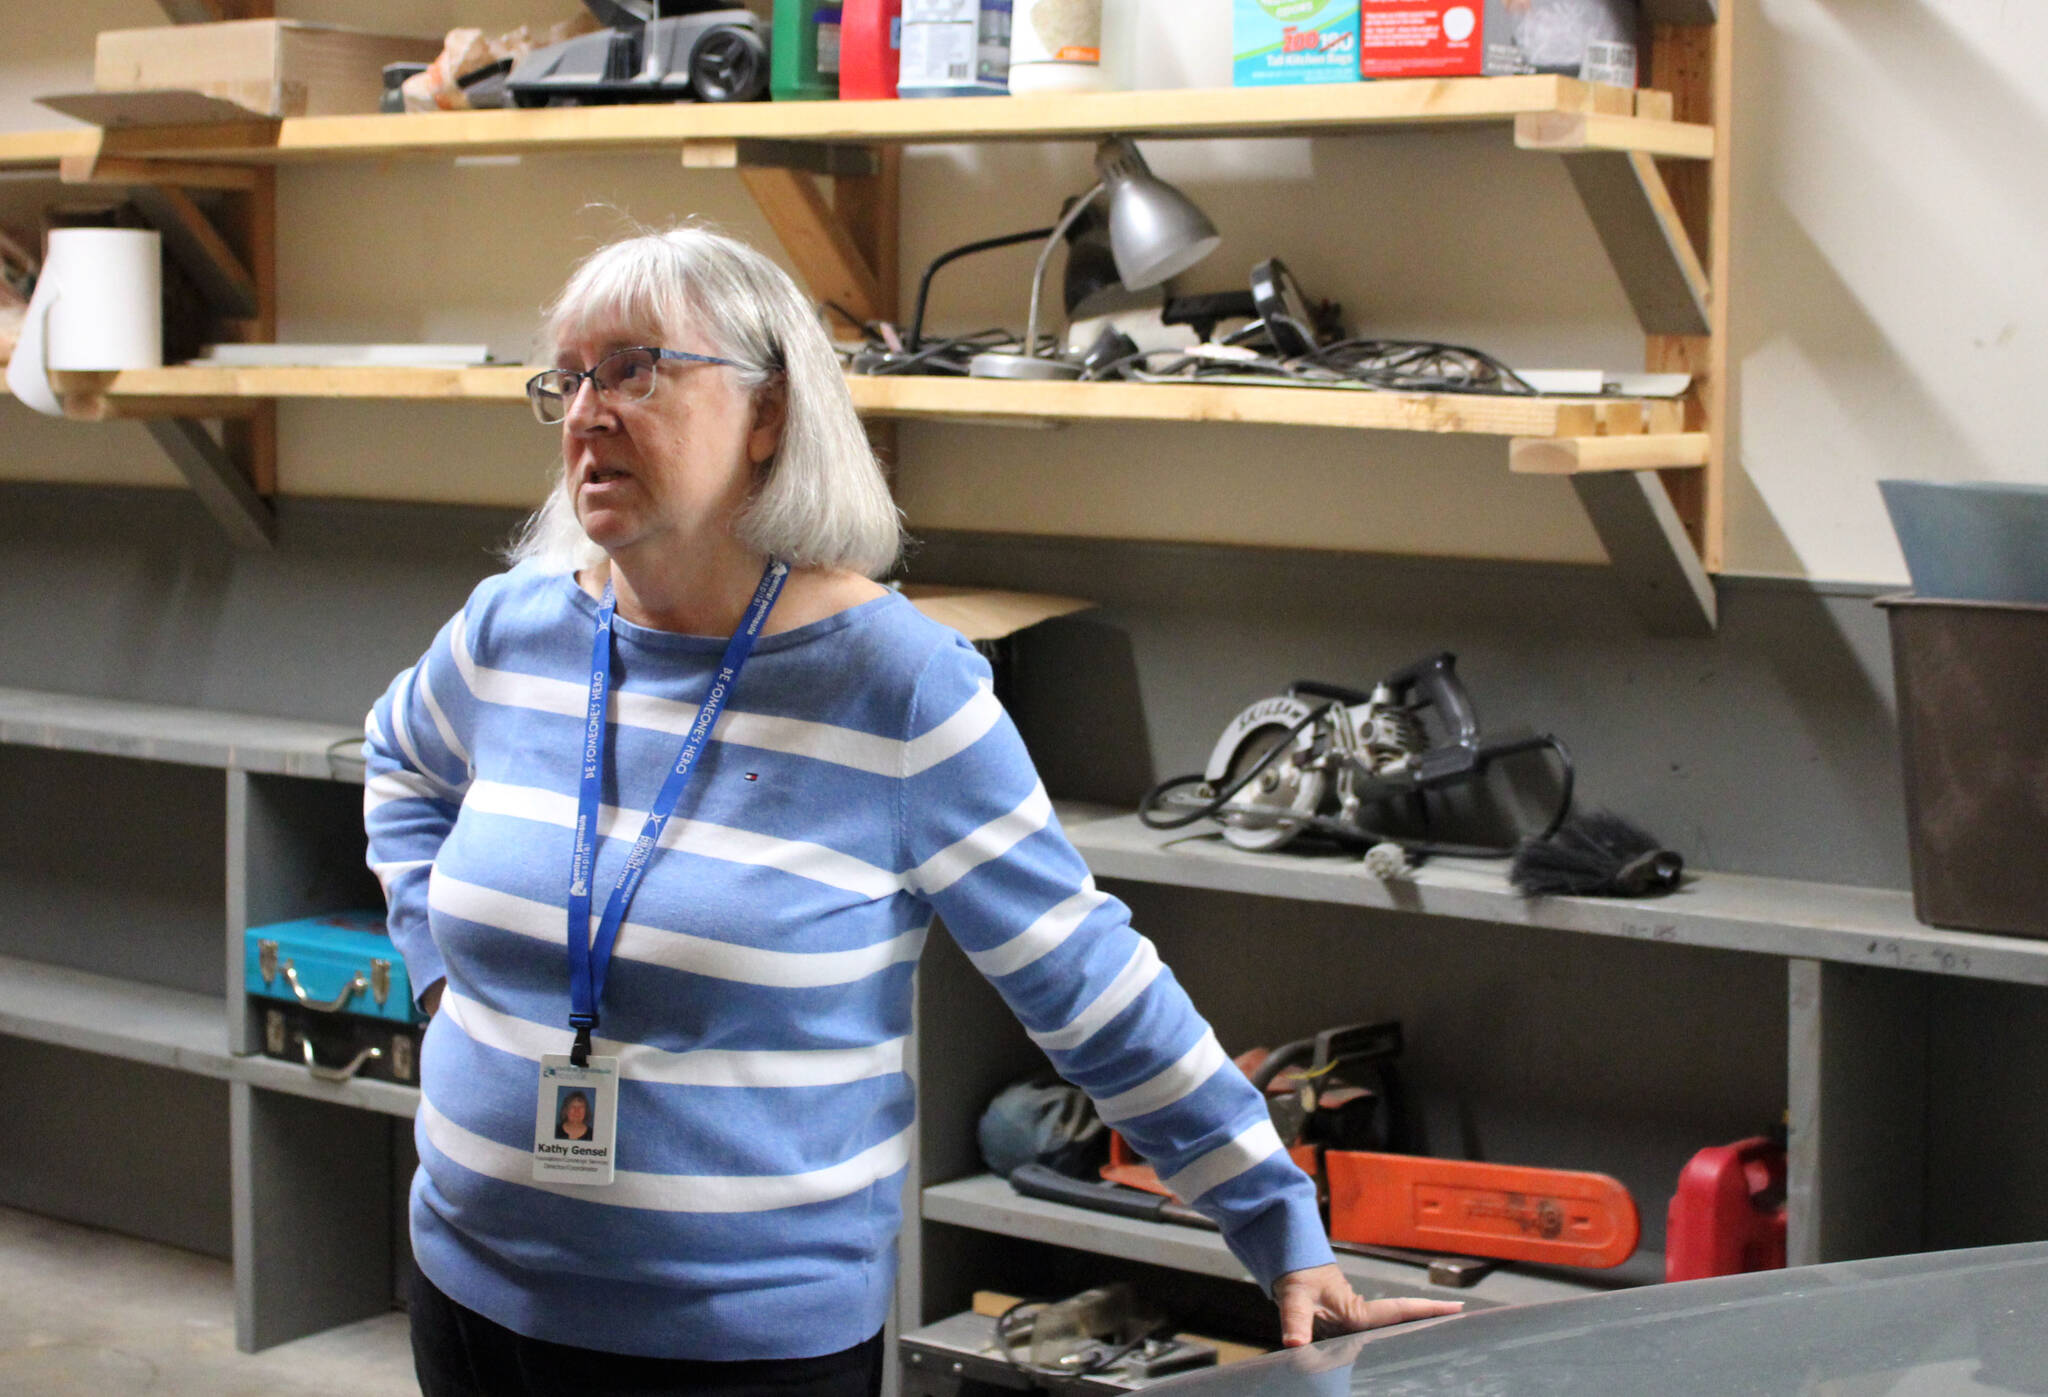 Kathy Gensel, president of Bridges Community Resource Network, Inc., stands in a garage at a cold weather shelter set to open next month on Monday, Nov. 22, 2021 in Nikiski, Alaska. (Ashlyn O’Hara/Peninsula Clarion)